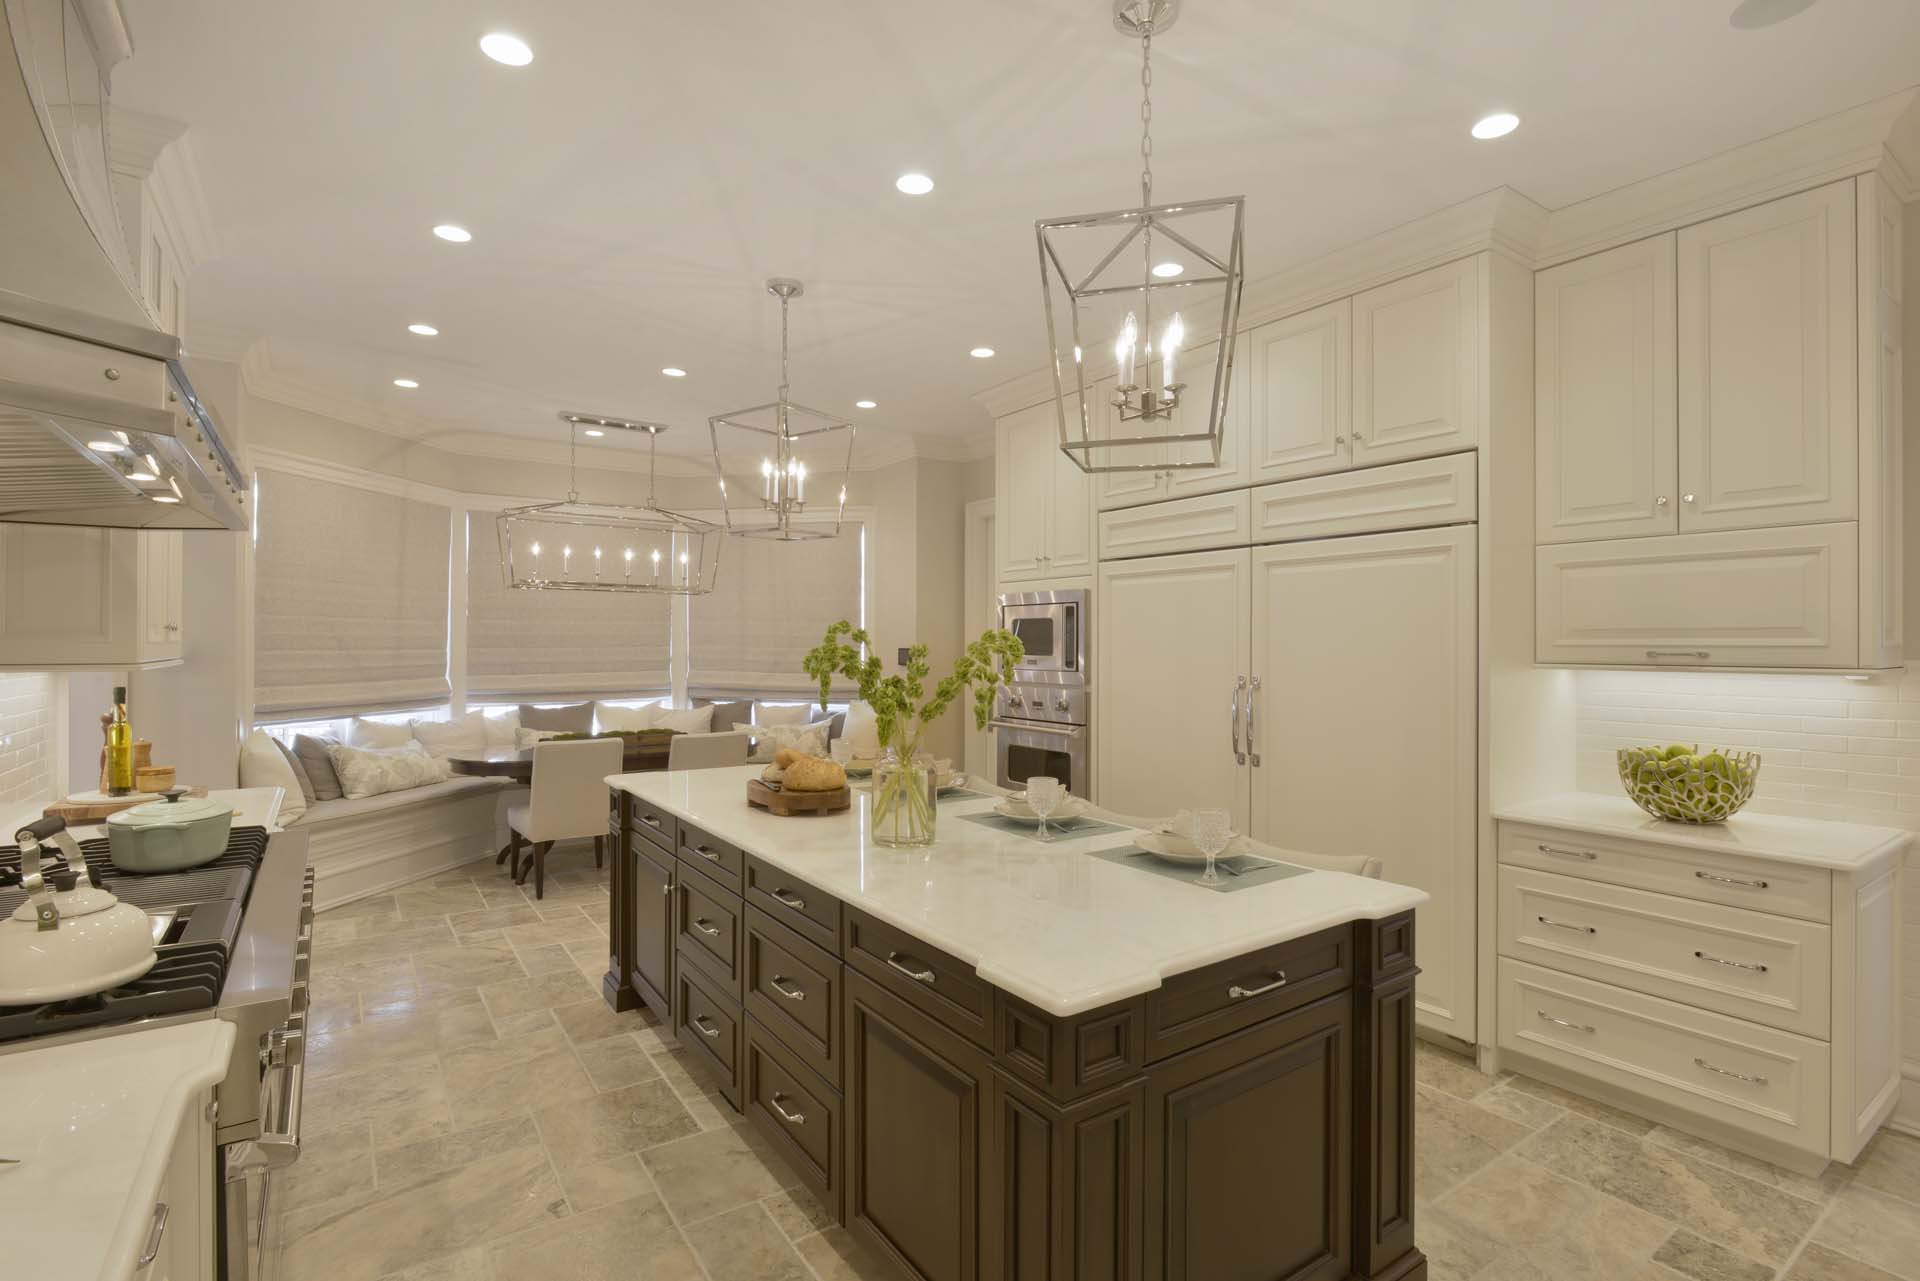 Classic kitchen features white painted Bilotta cabinetry and marble-topped cherry stained island.